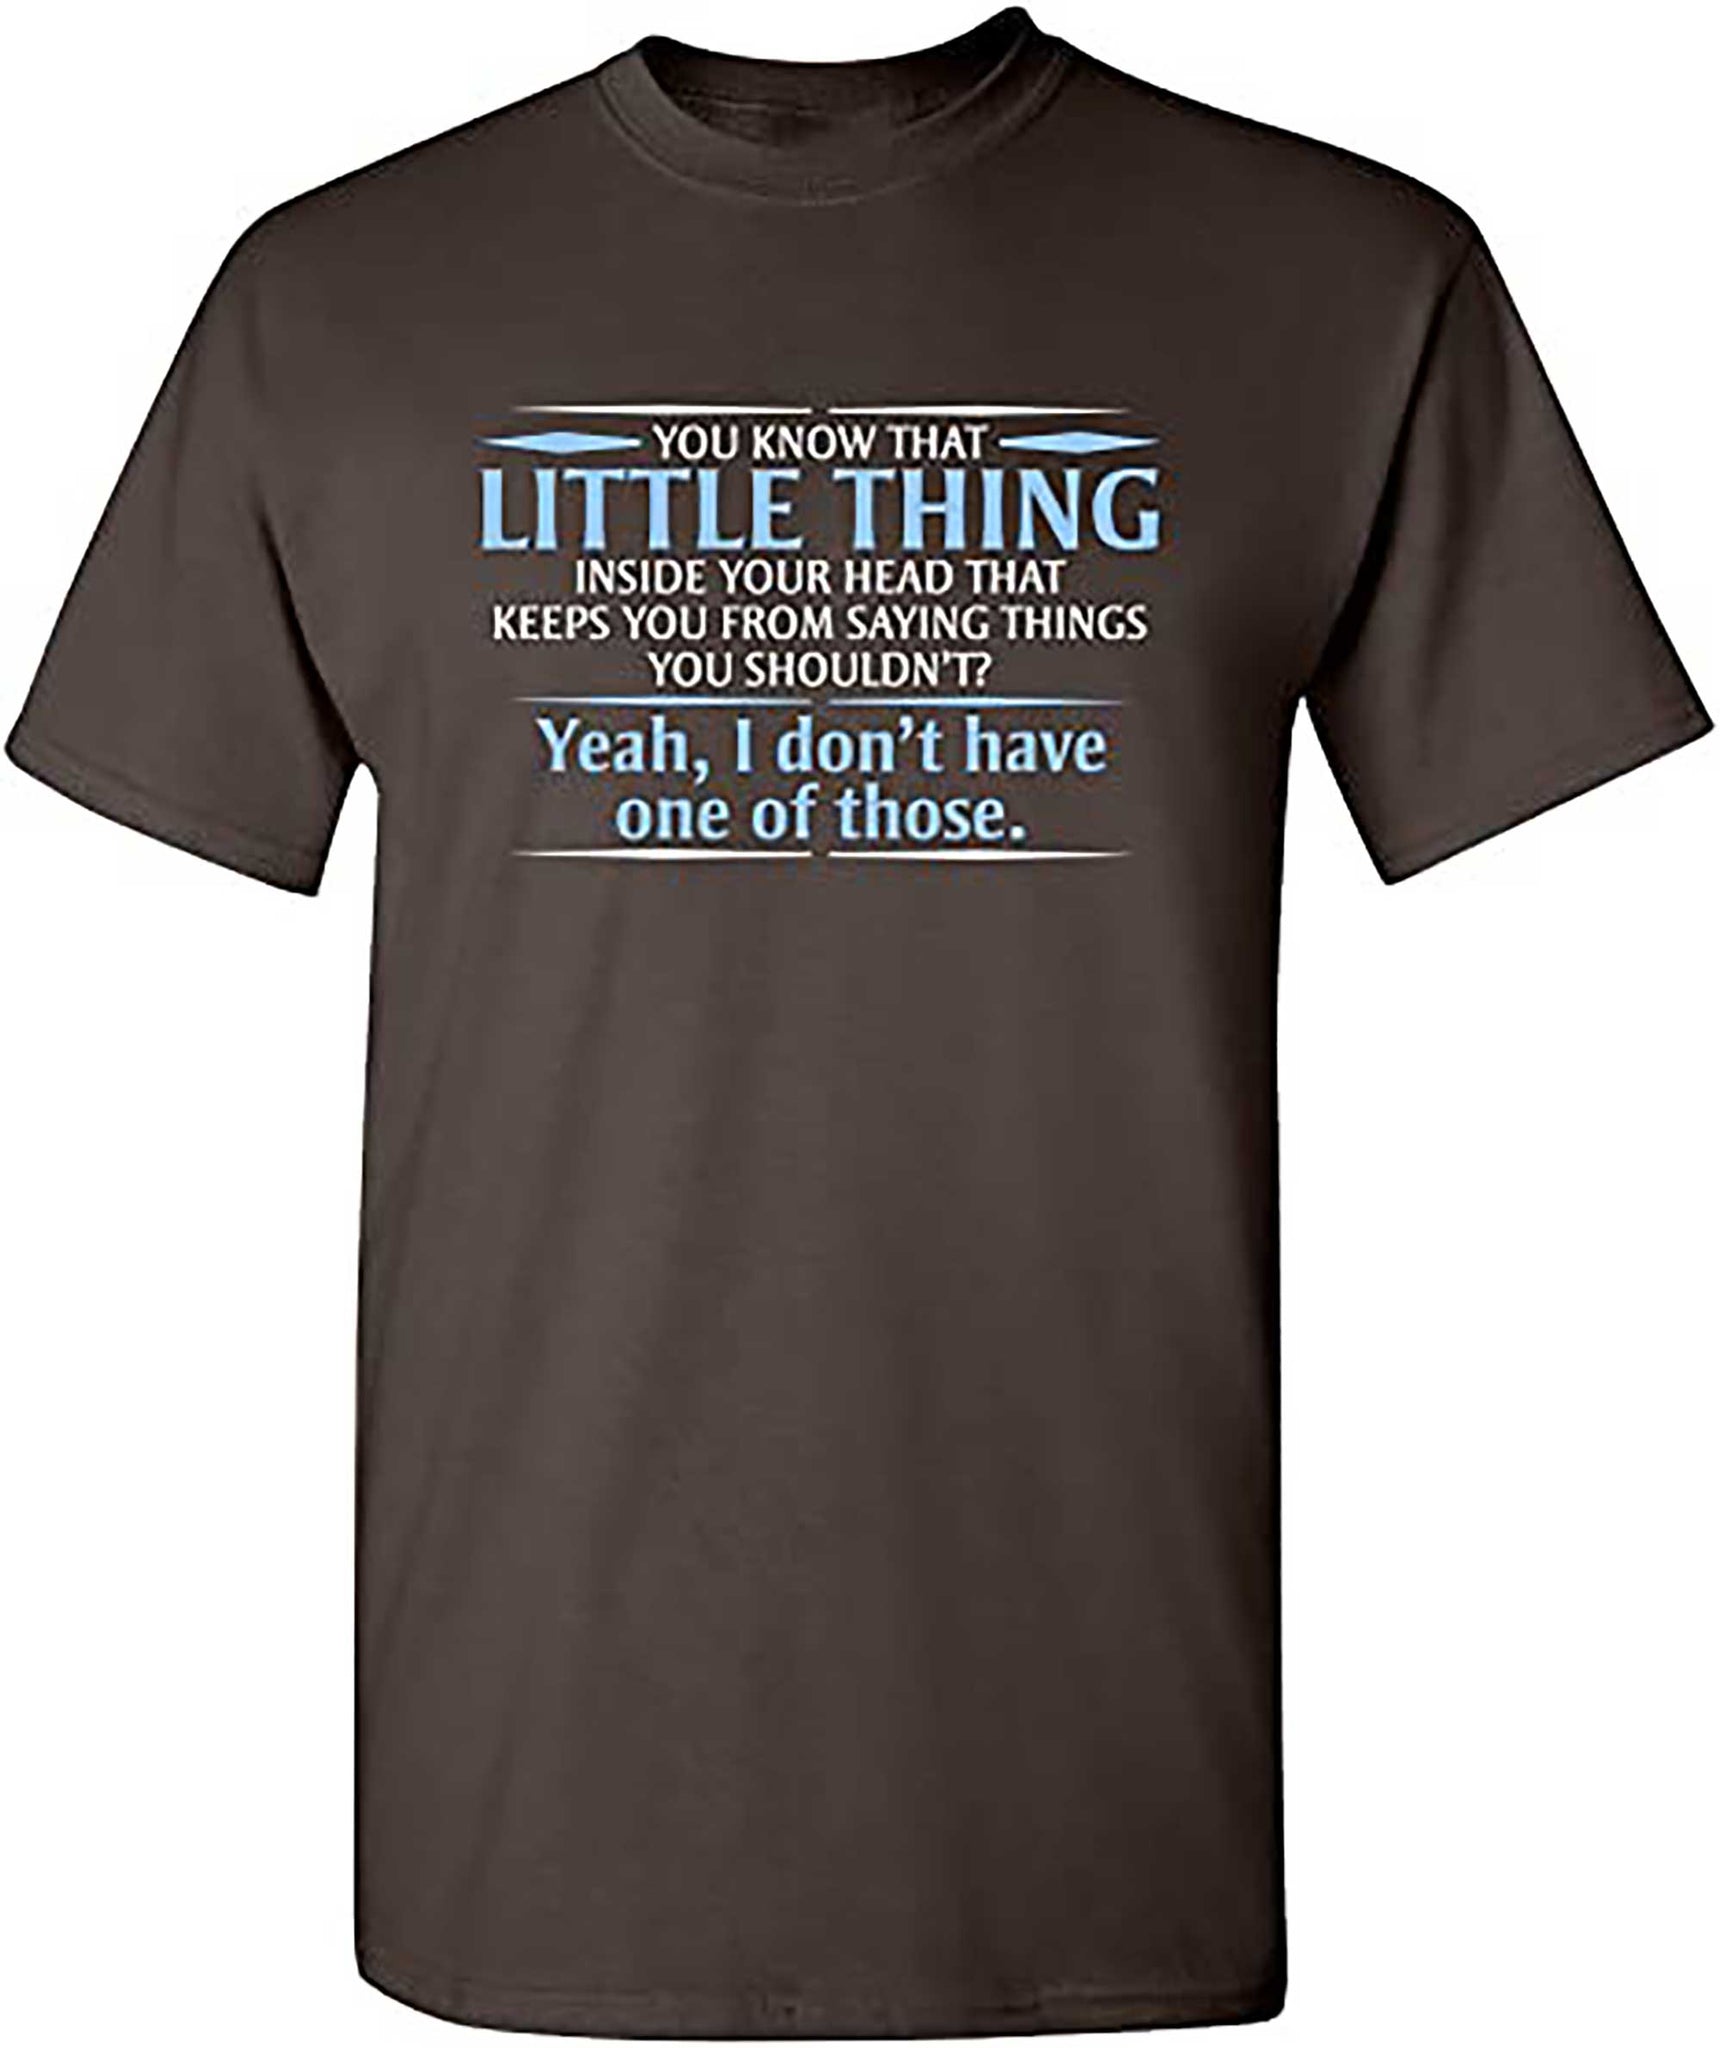 Skitongift You Know The Little Thing Cool Graphic Sarcastic Sarcasm Novelty Funny T Shirt